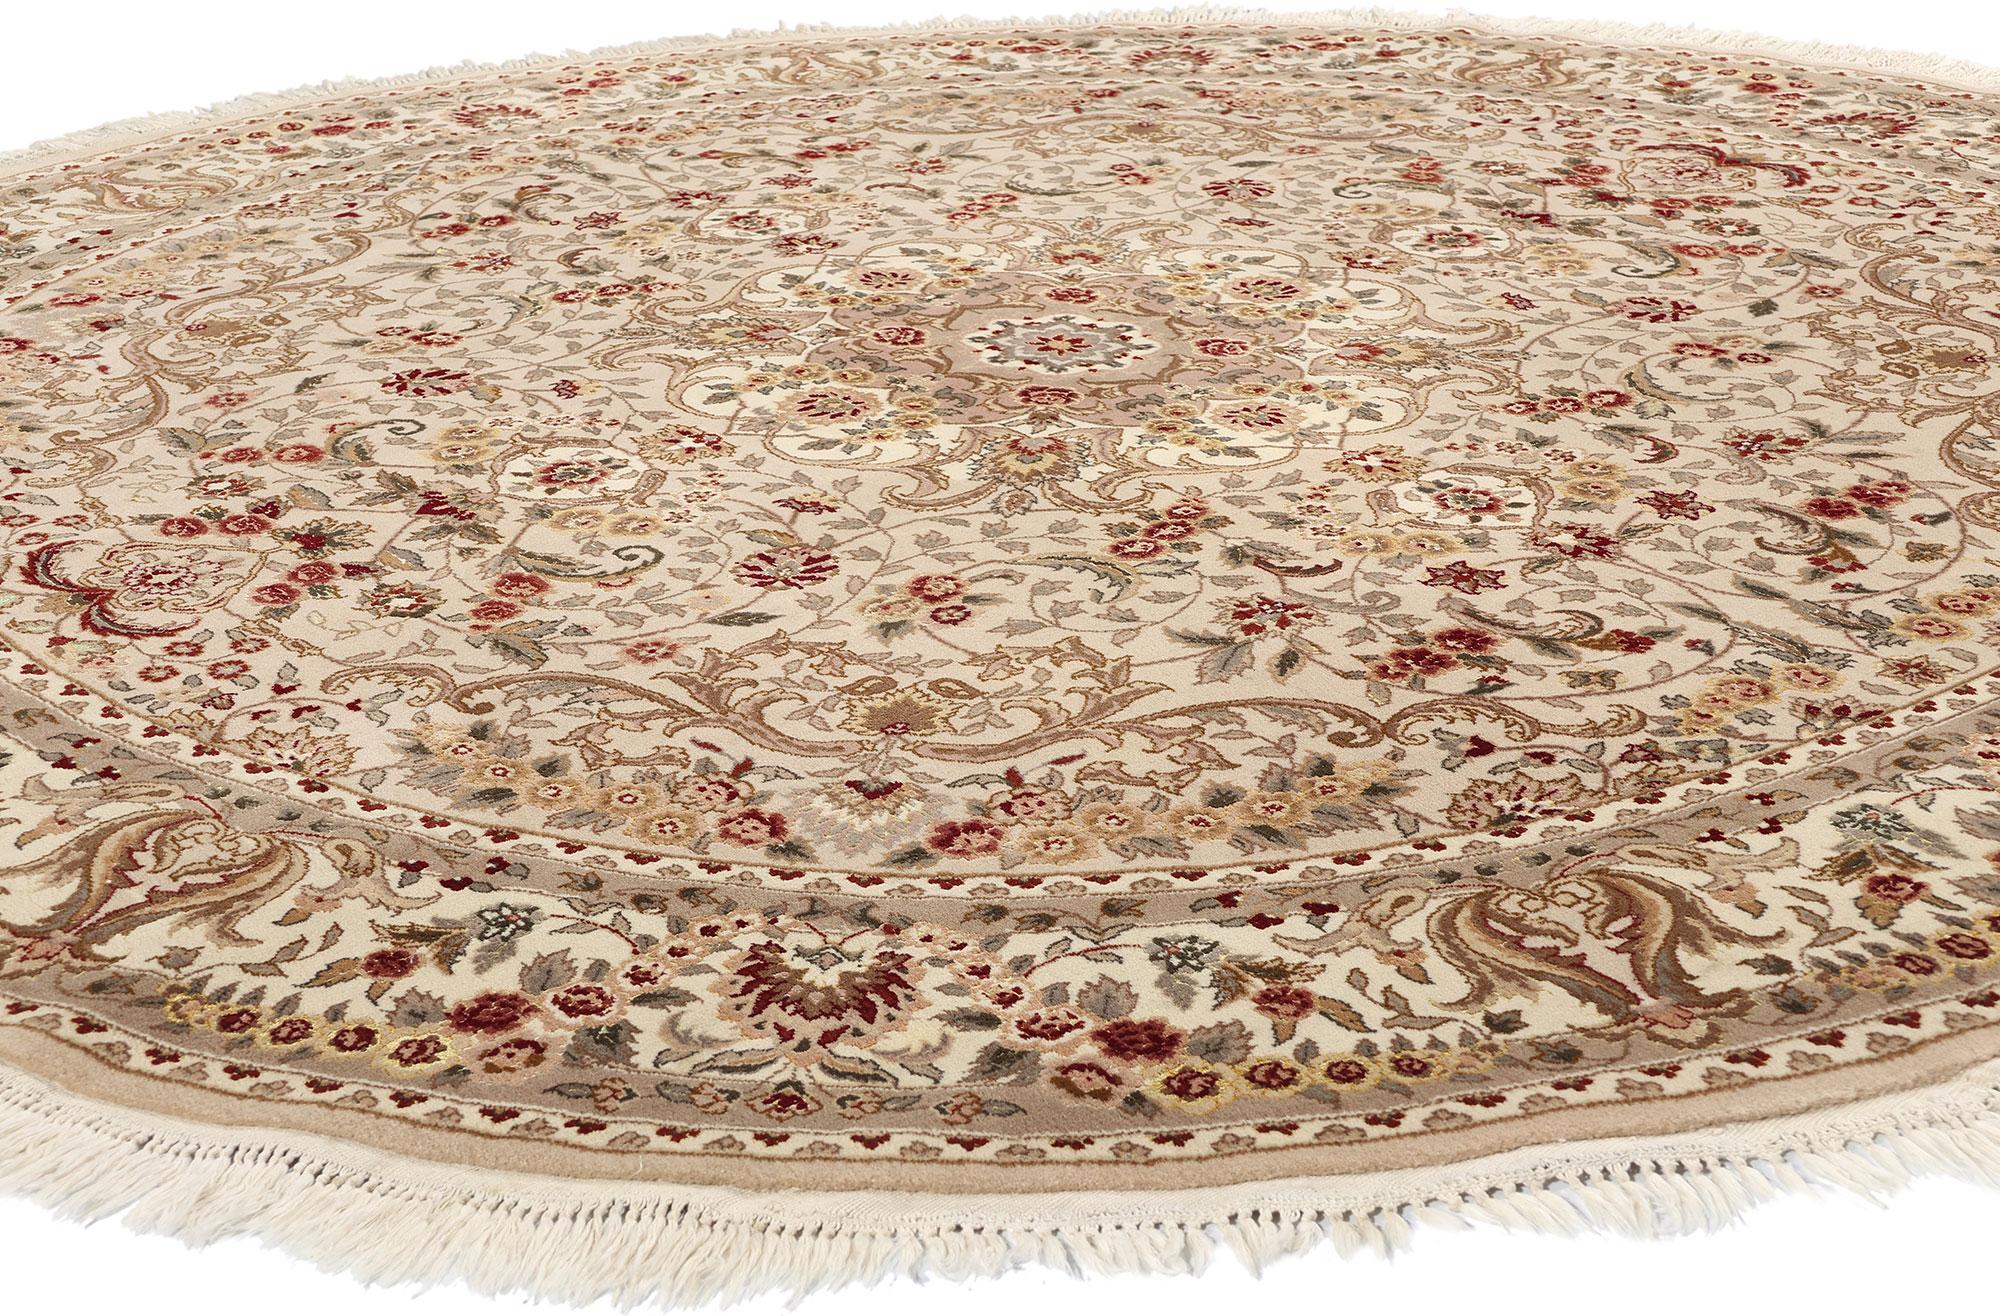 74981 Vintage Chinese Tabriz Wool & Silk Round Area Rug, 08'02 X 08'02. Chinese Tabriz round area rugs crafted with a blend of wool and silk offer a harmonious marriage of luxurious texture and exquisite sheen. The wool provides durability, warmth,